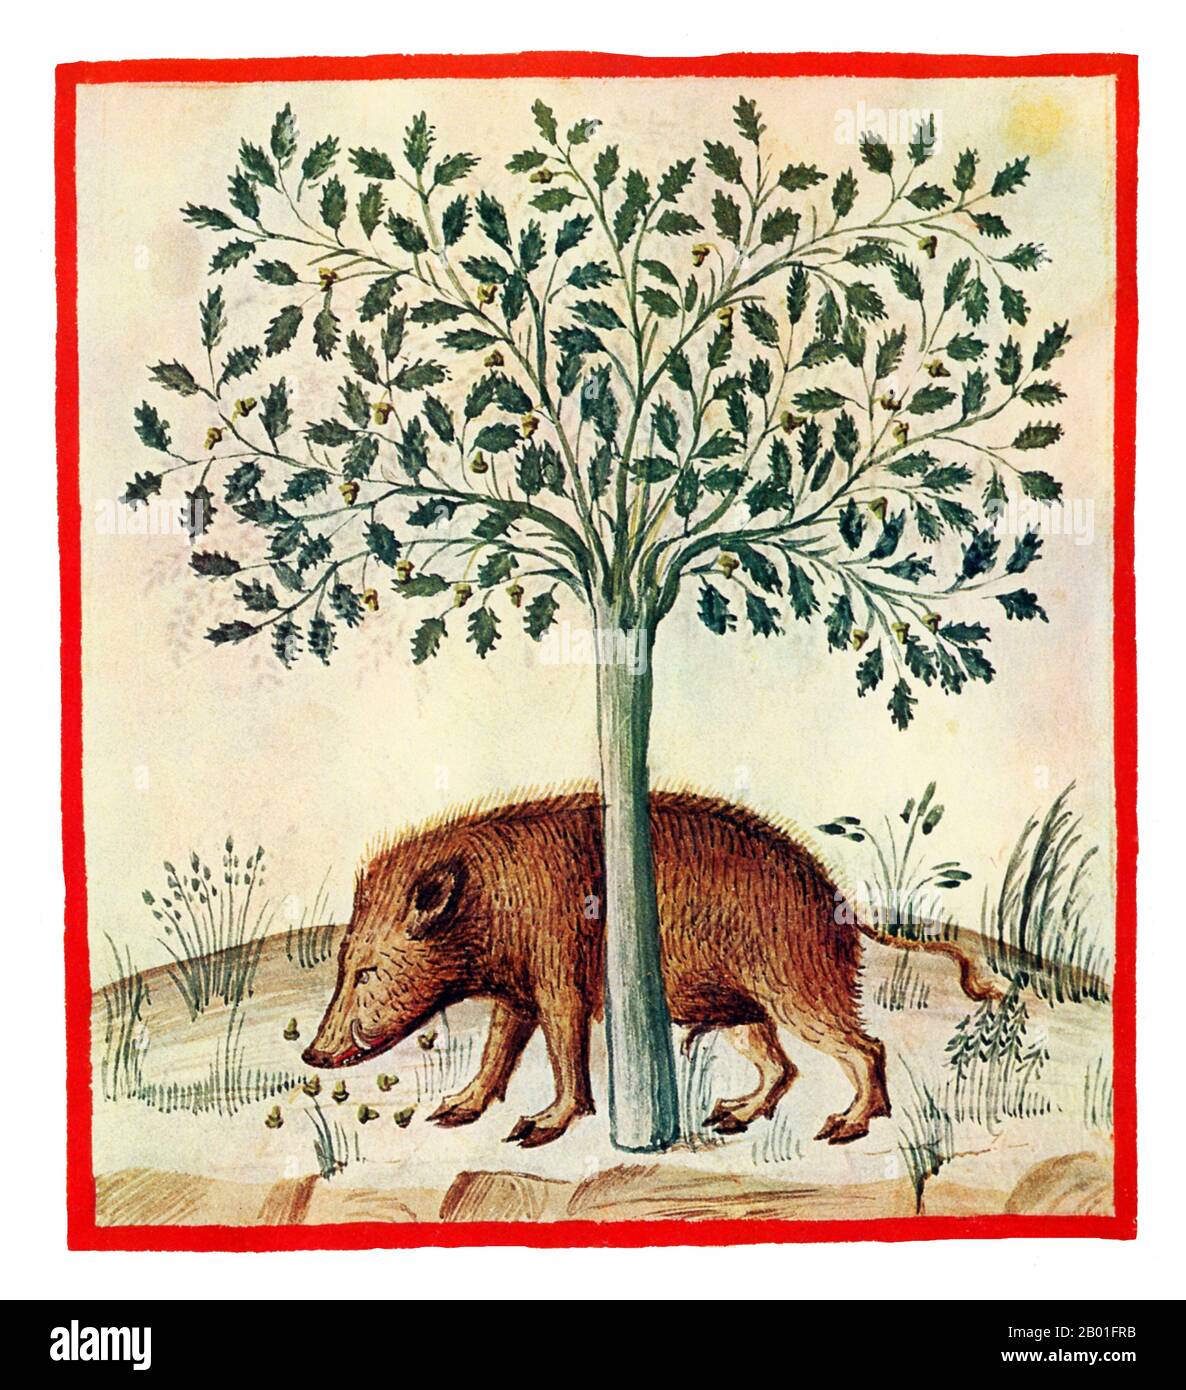 Iraq/Italy: Acorns (Glandes). Illustration from Ibn Butlan's Taqwim al-sihha or 'Maintenance of Health' (Baghdad, 11th century), published in Italy as the Tacuinum Sanitatis, 14th century.  The Tacuinum (sometimes Taccuinum) Sanitatis is a medieval handbook on health and well being, based on the Taqwim al‑sihha تقويم الصحة ('Maintenance of Health'), an eleventh-century Arab medical treatise by Ibn Butlan of Baghdad.  Ibn Butlân was a Christian physician born in Baghdad and who died in 1068. Stock Photo